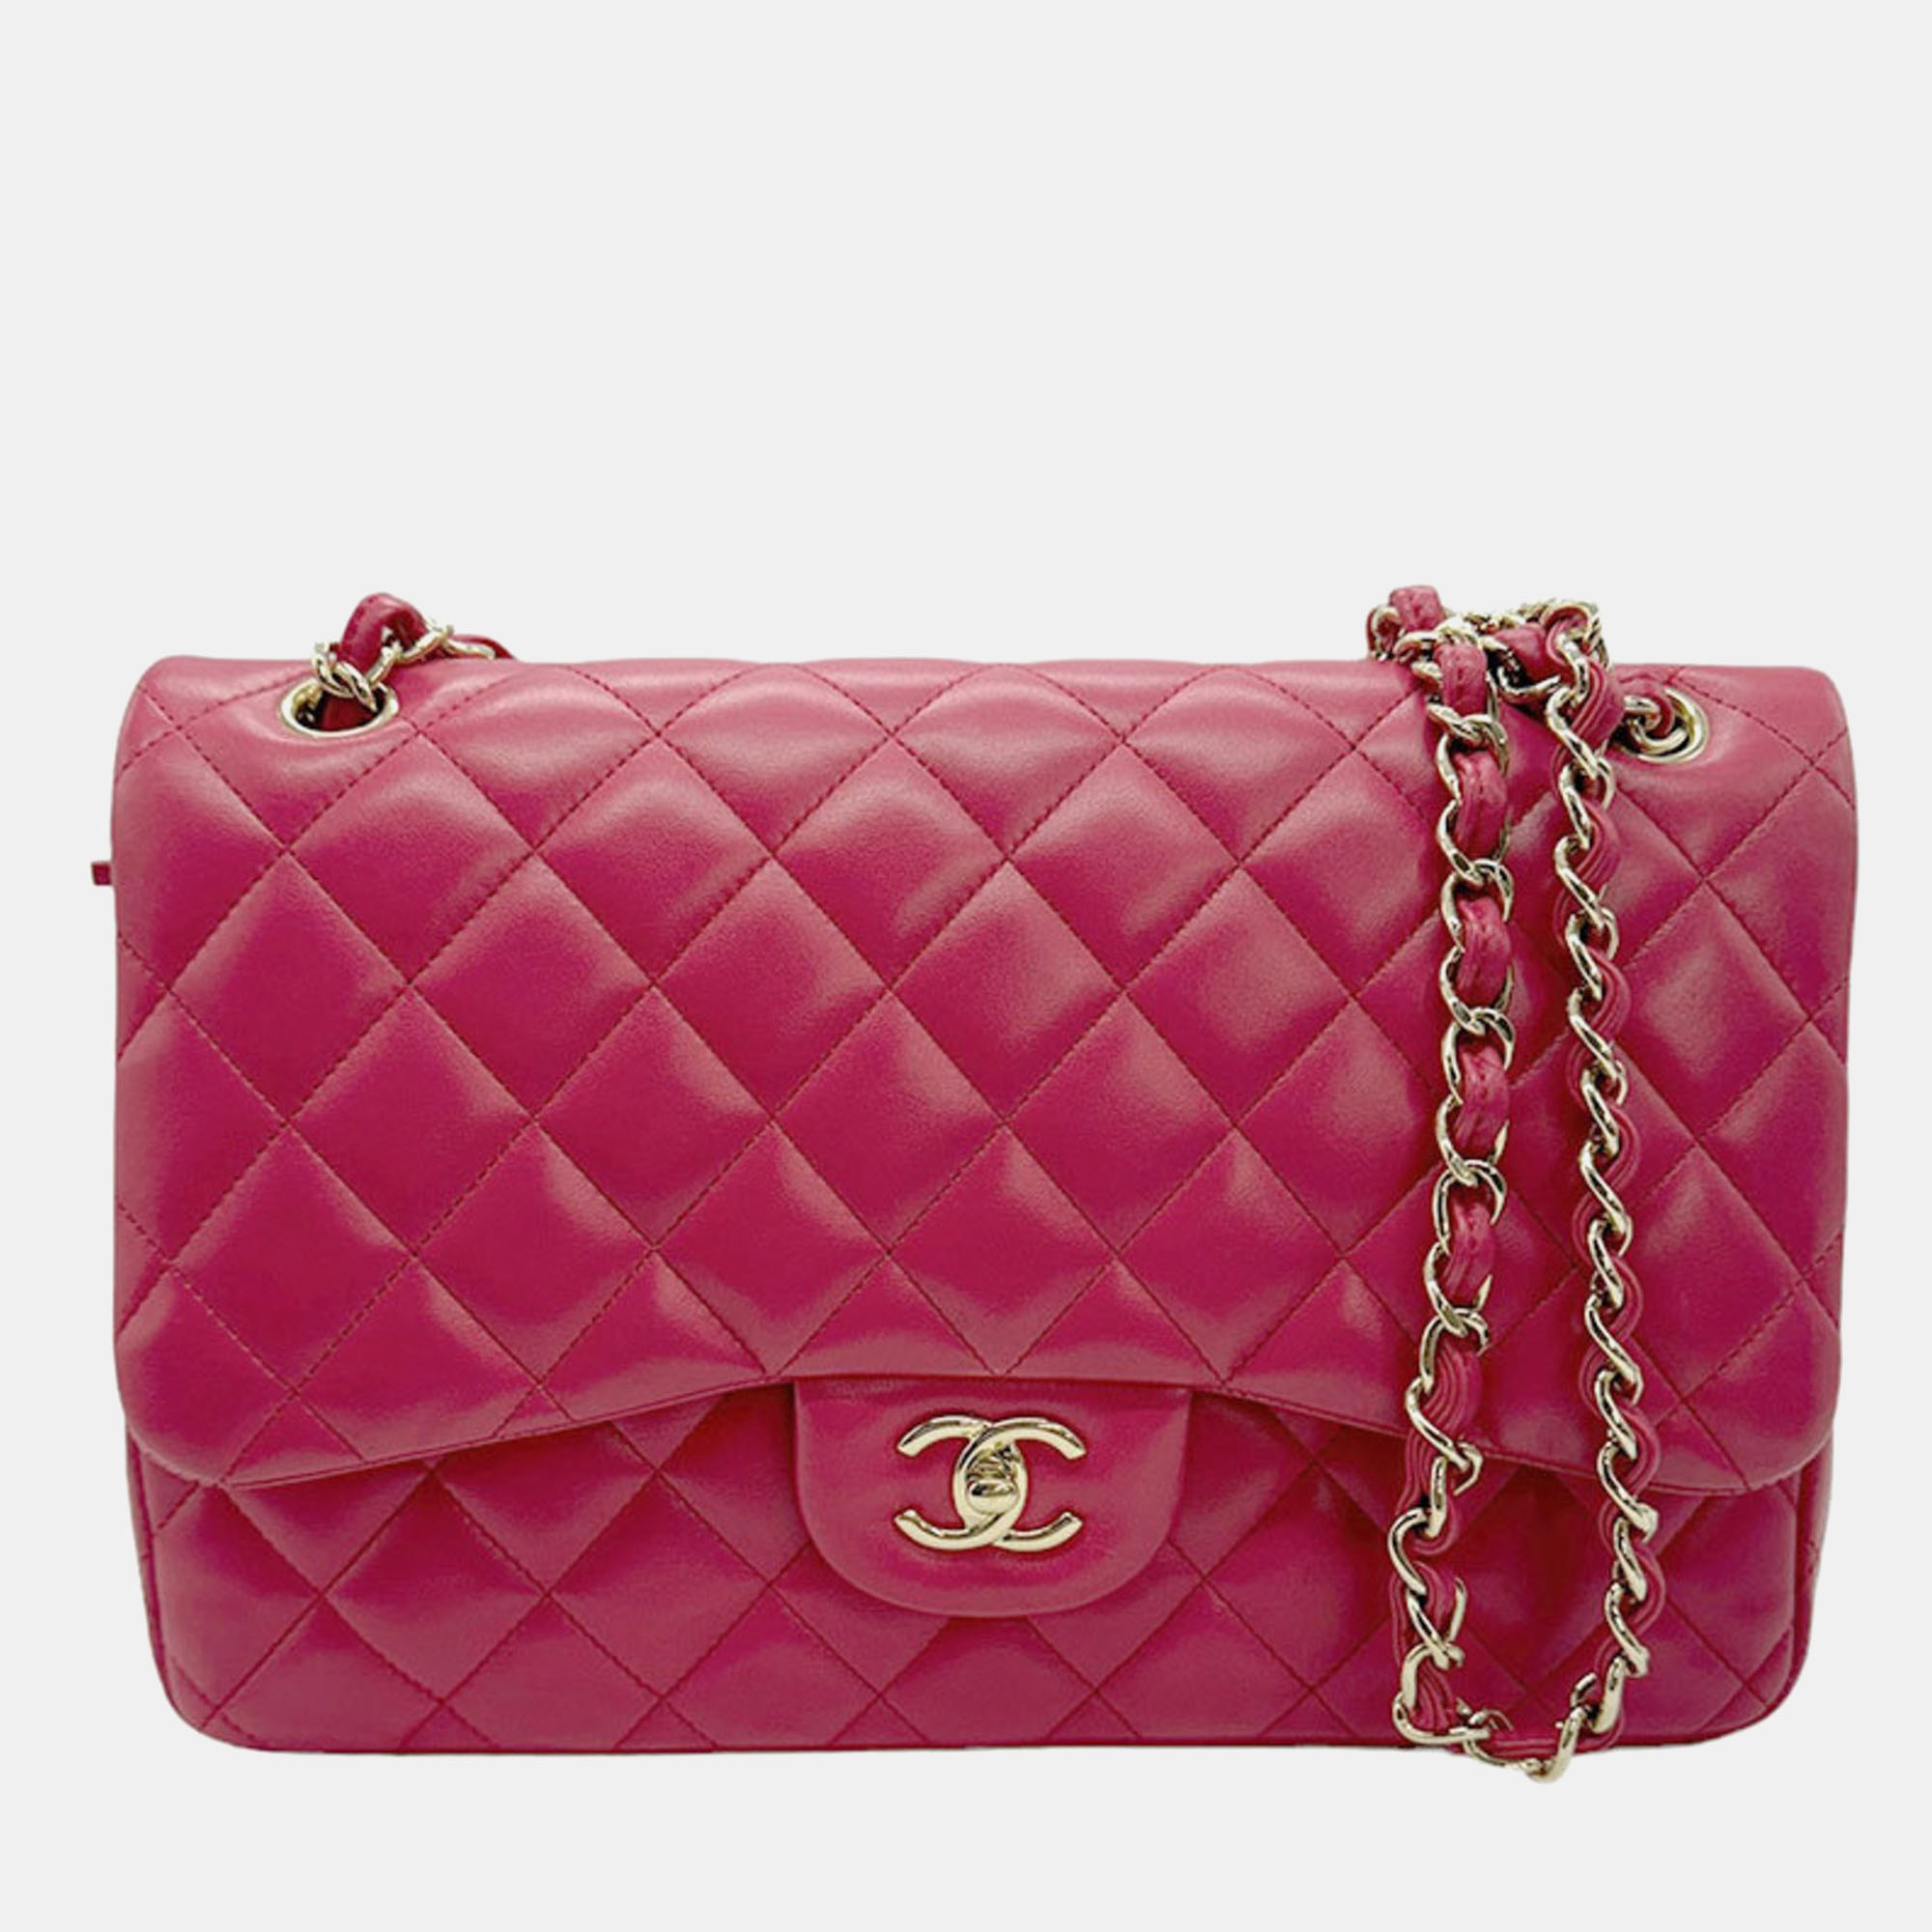 

Chanel Pink Lambskin Leather Large Classic Double Flap Shoulder Bag